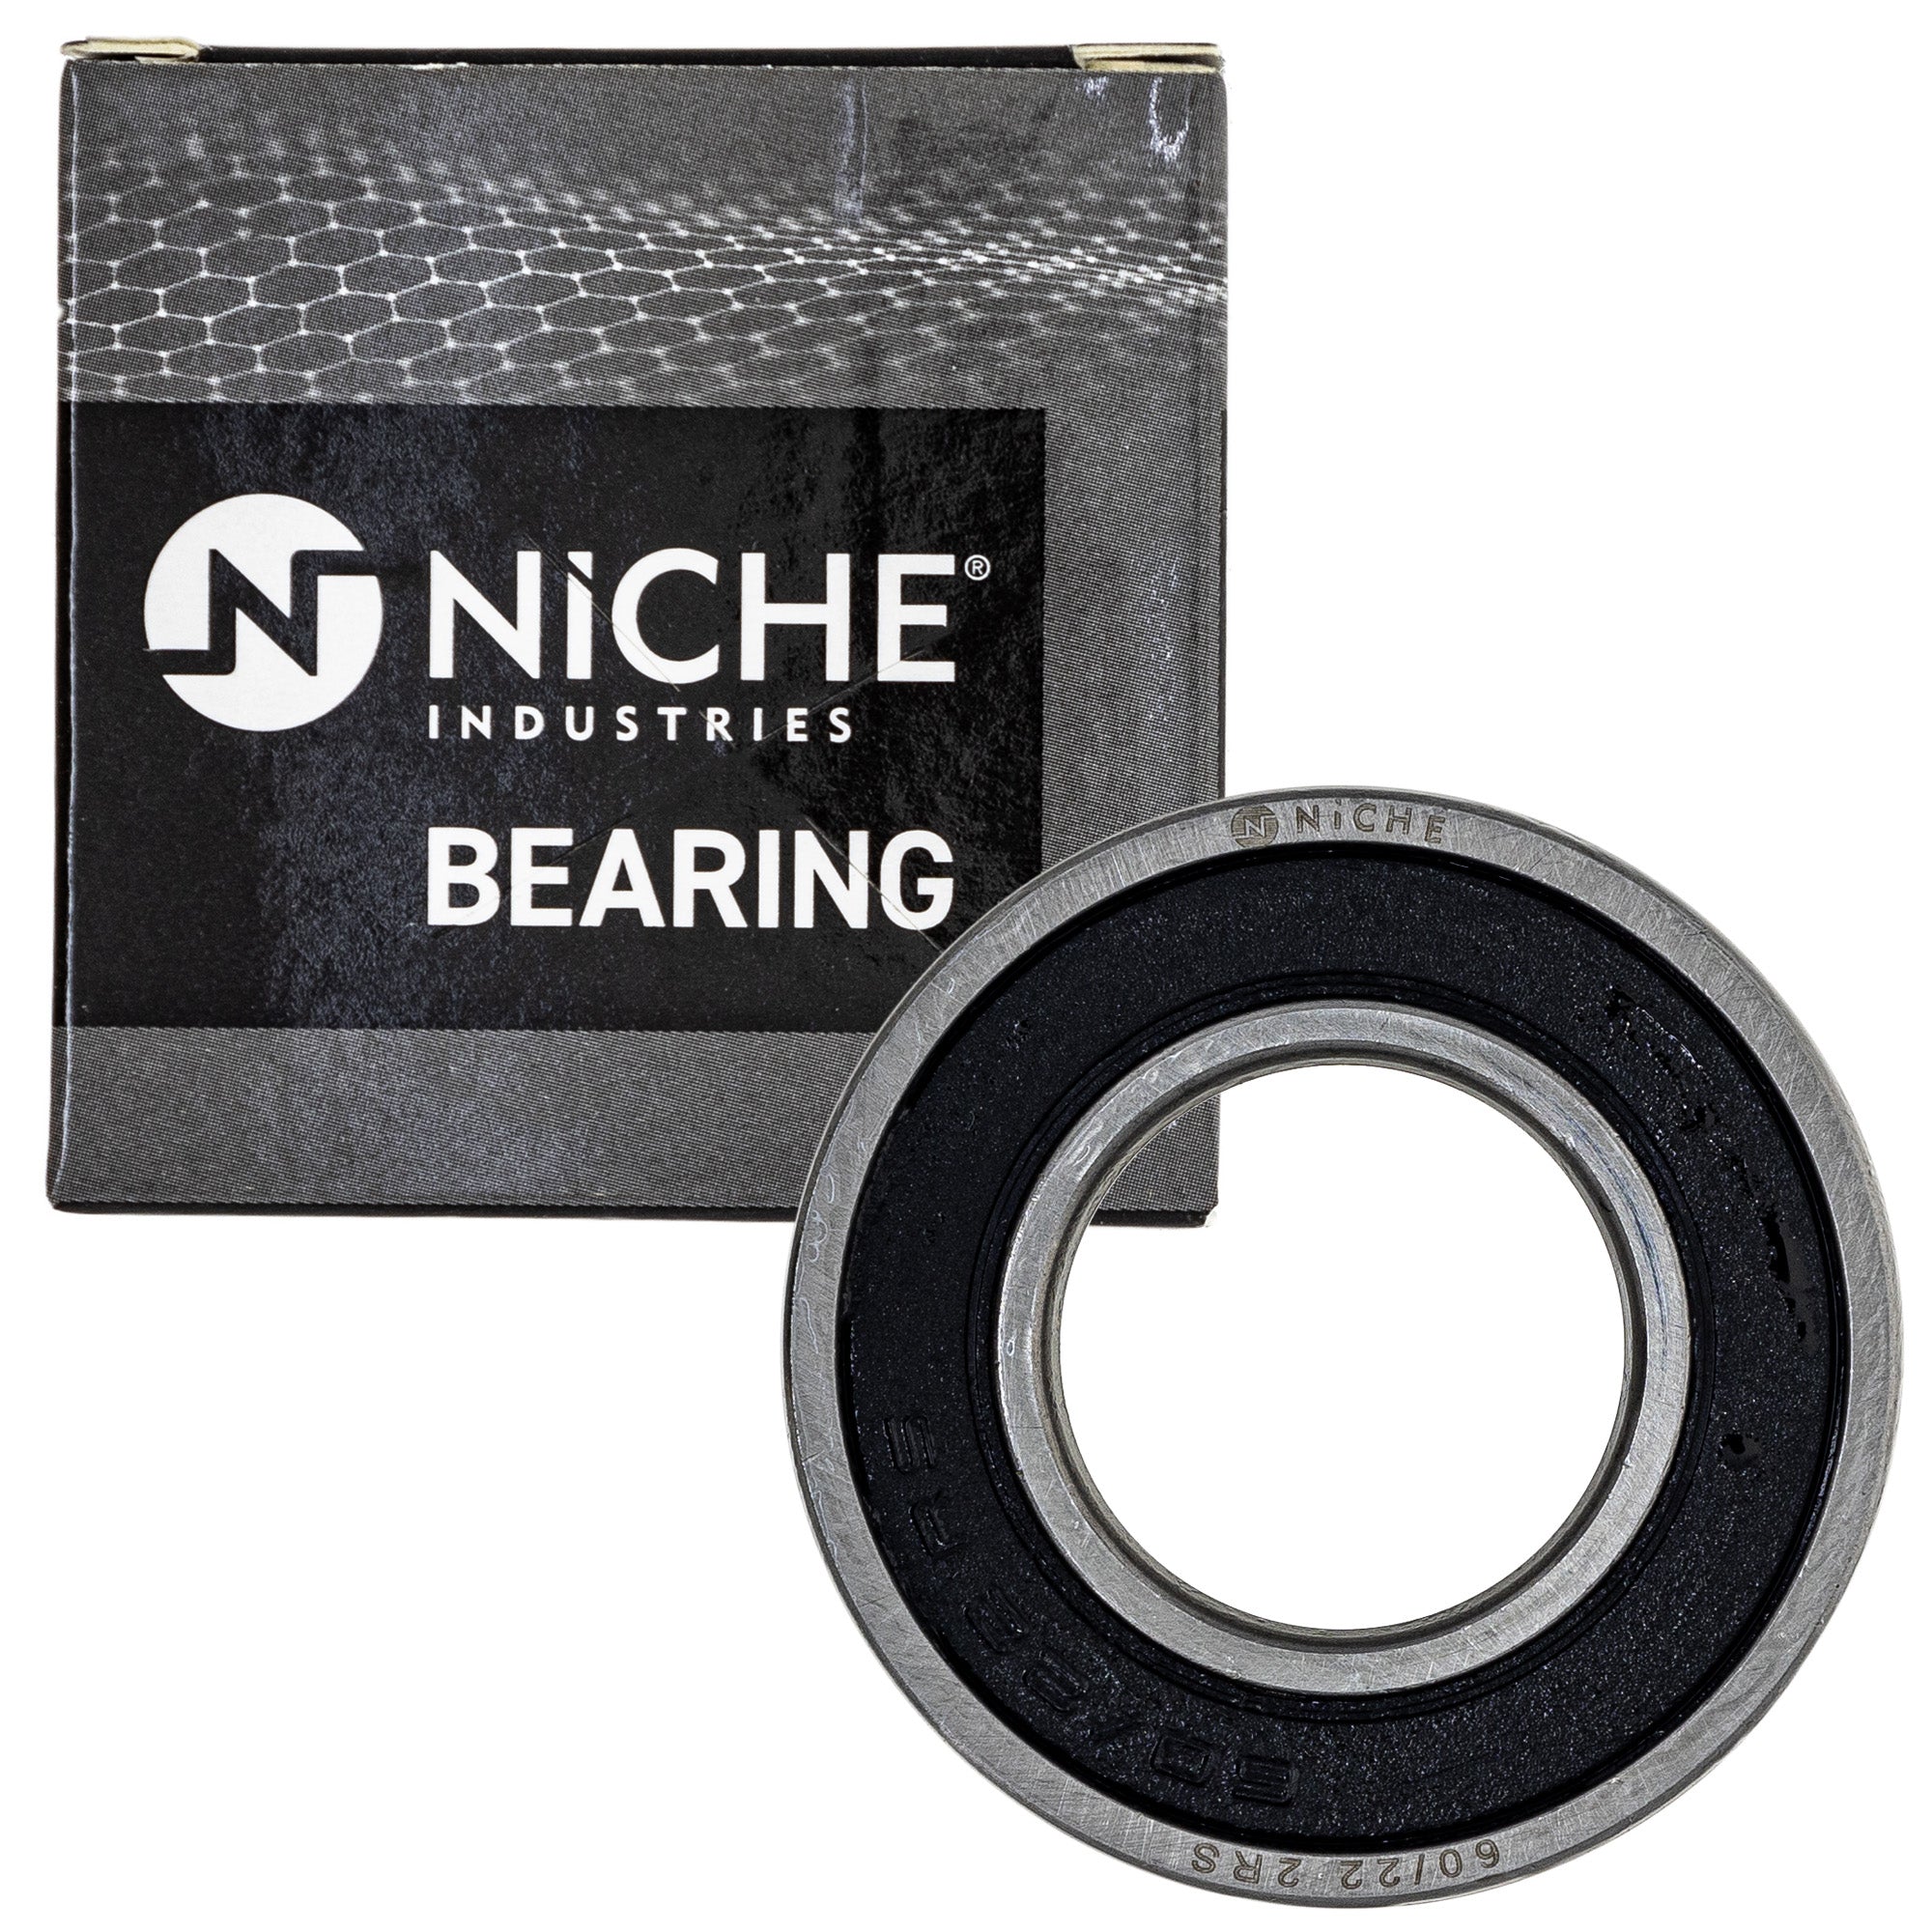 NICHE MK1009132 Wheel Bearing Seal Kit for zOTHER RM250 RM125